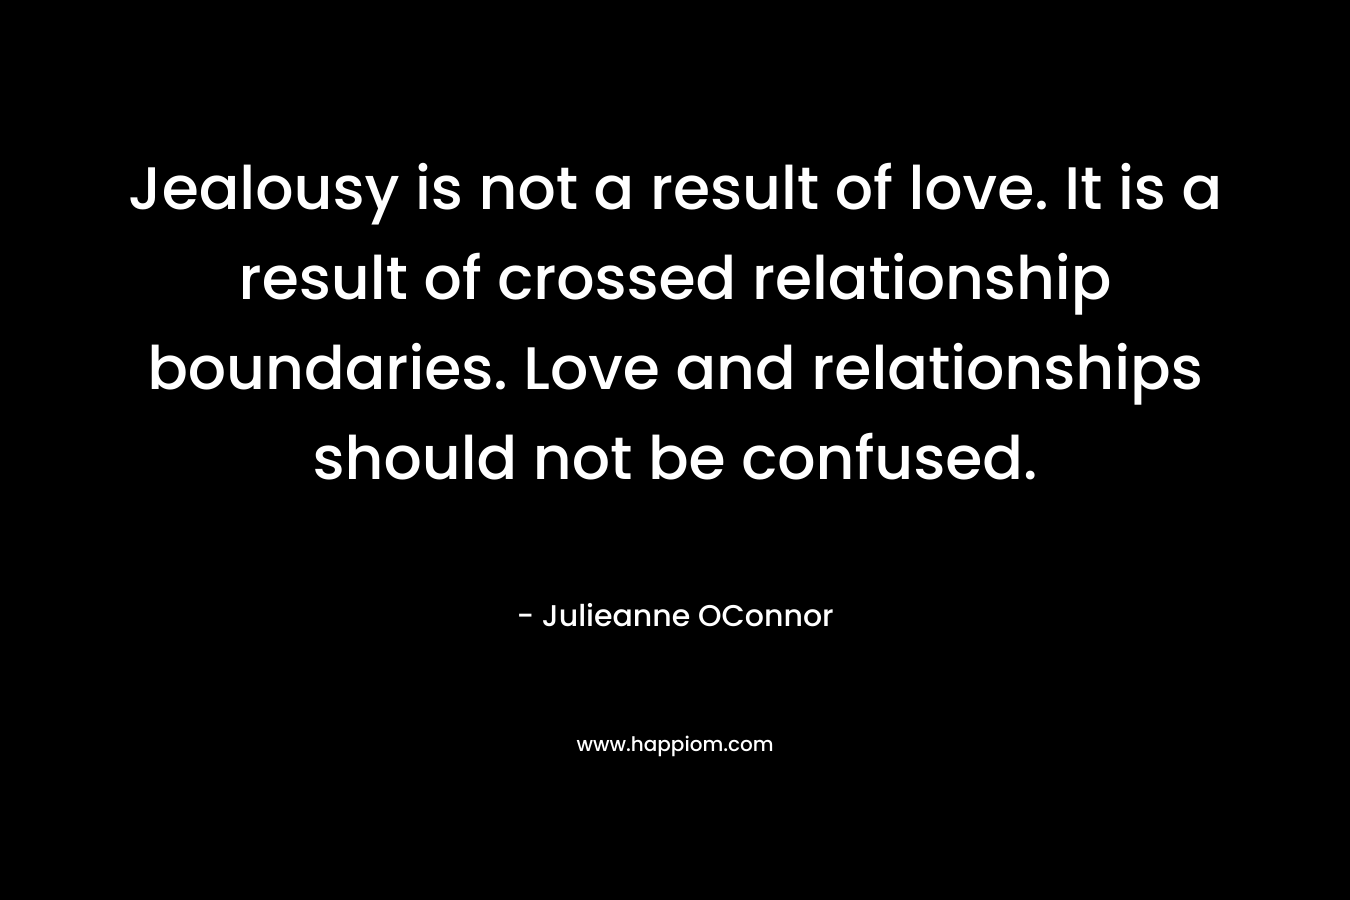 Jealousy is not a result of love. It is a result of crossed relationship boundaries. Love and relationships should not be confused. – Julieanne OConnor